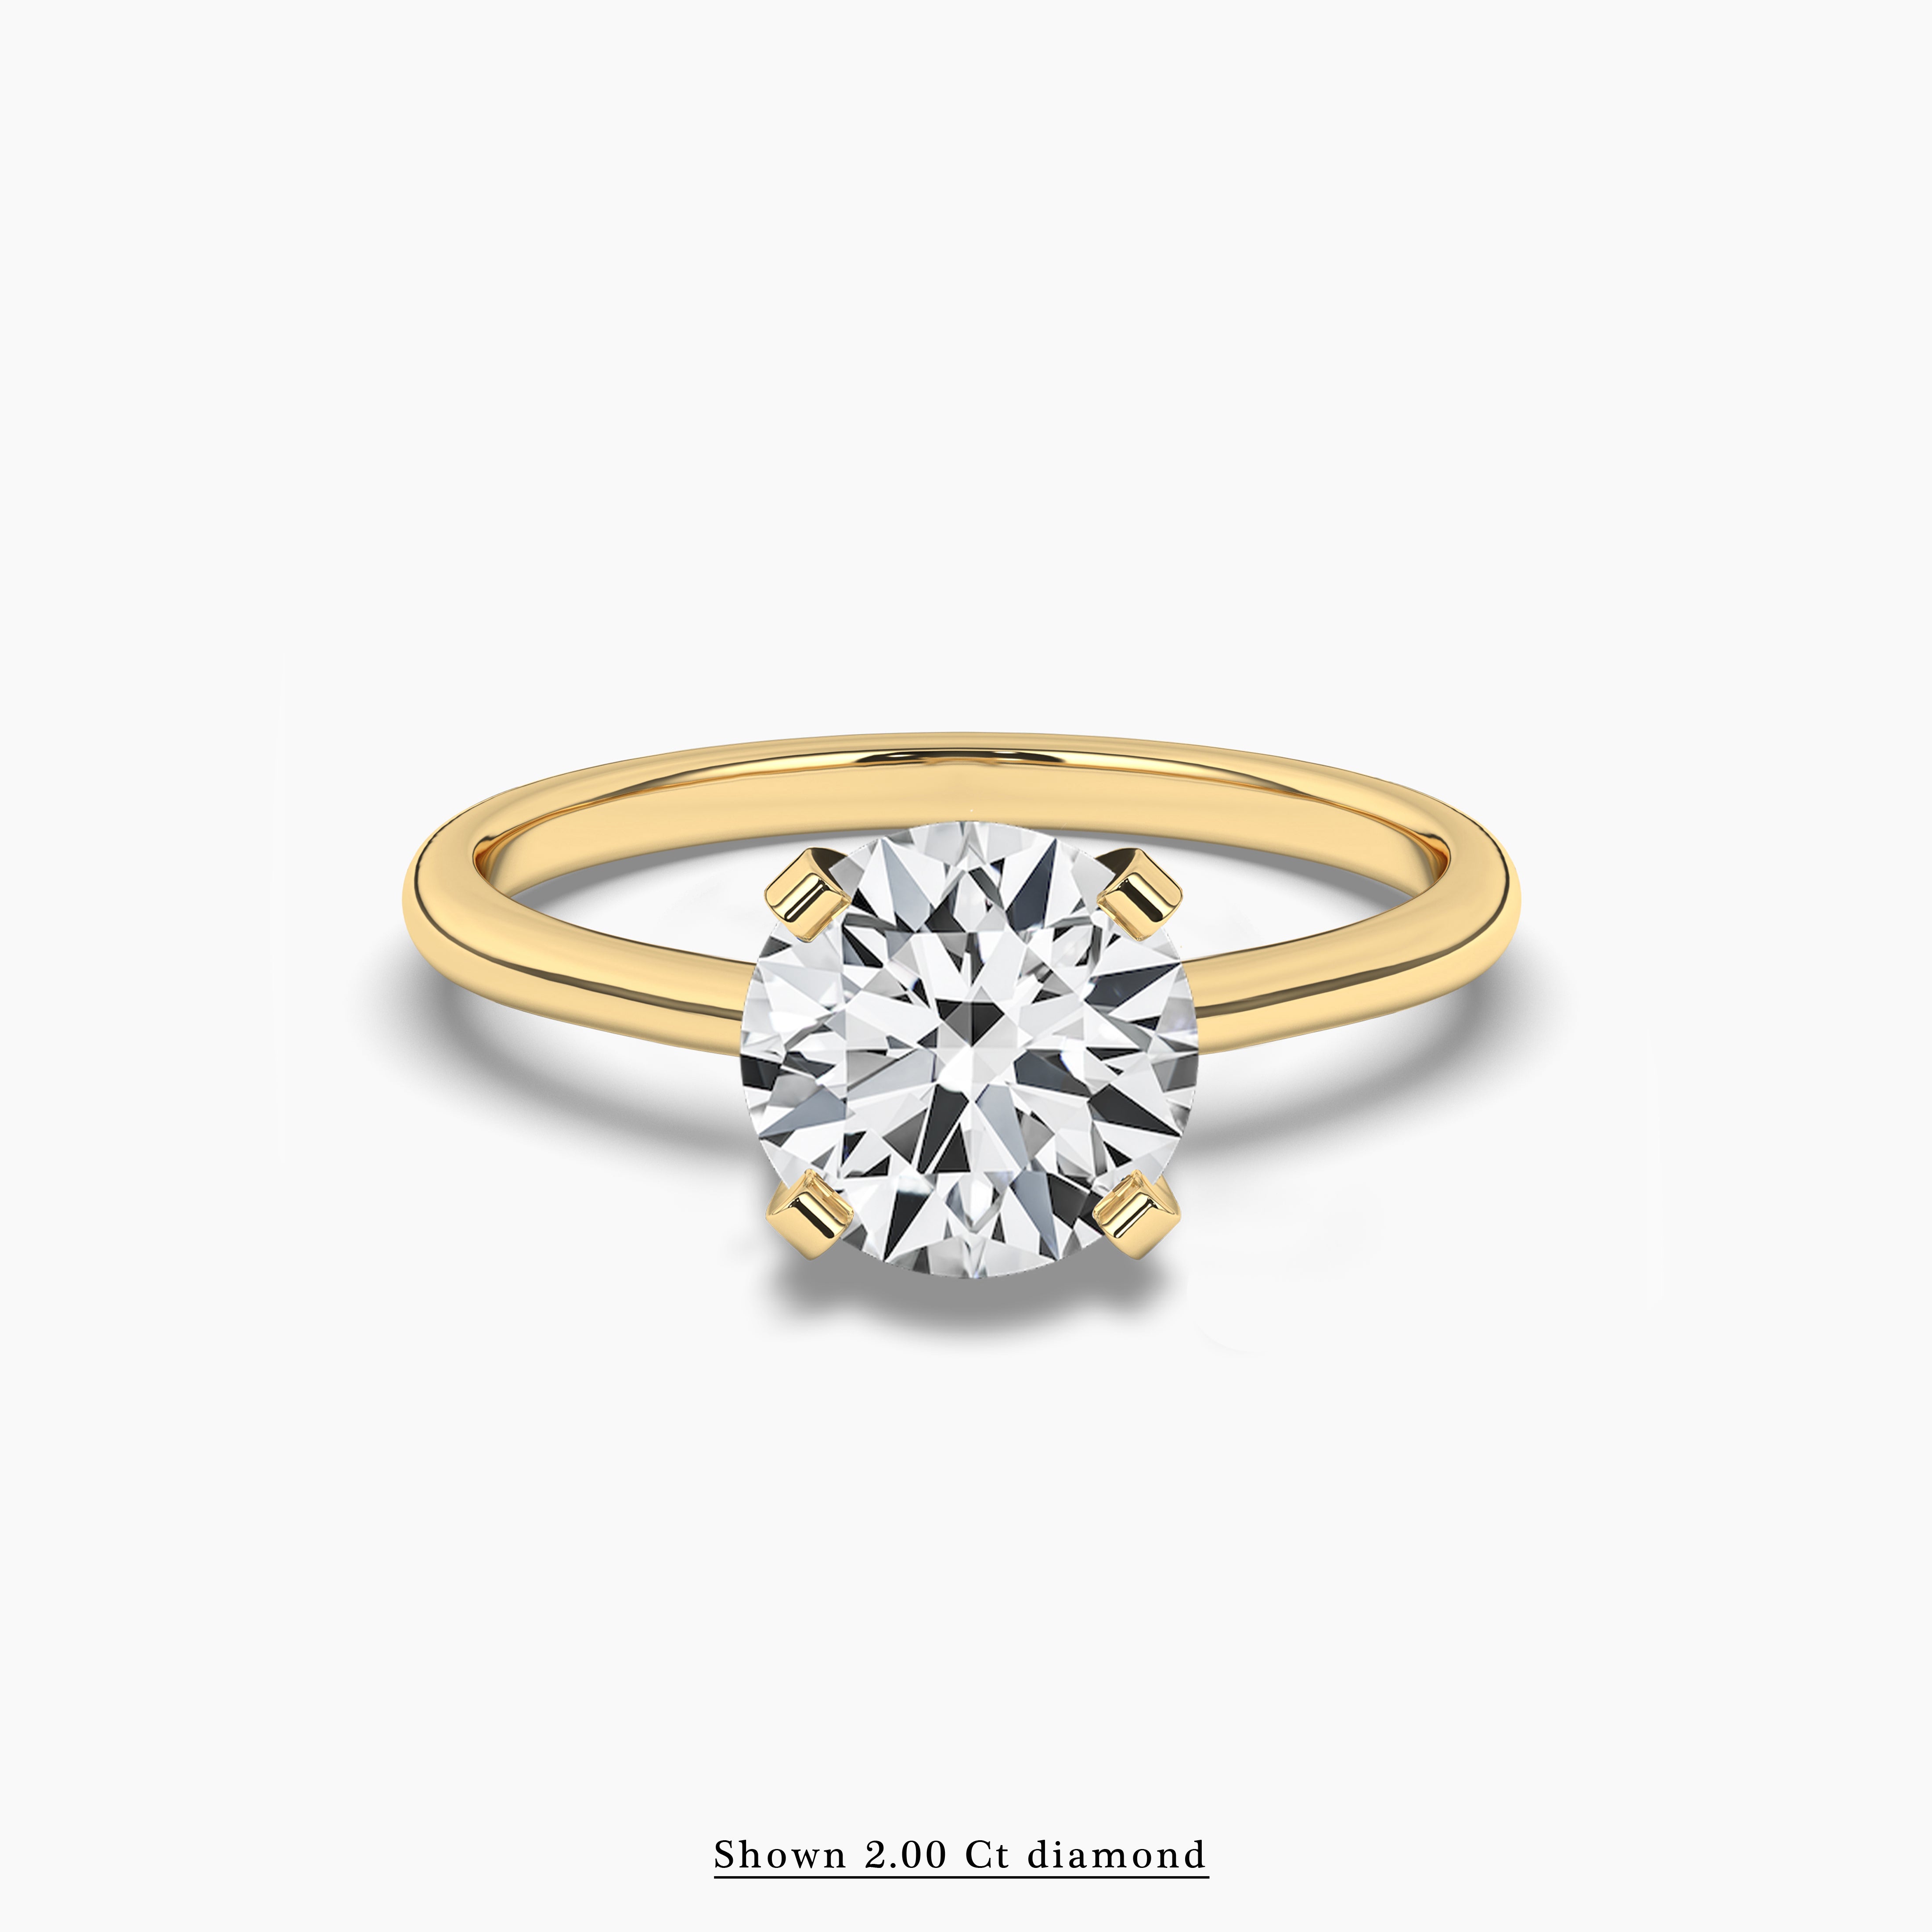 Round cut diamond engagement ring in yellow gold